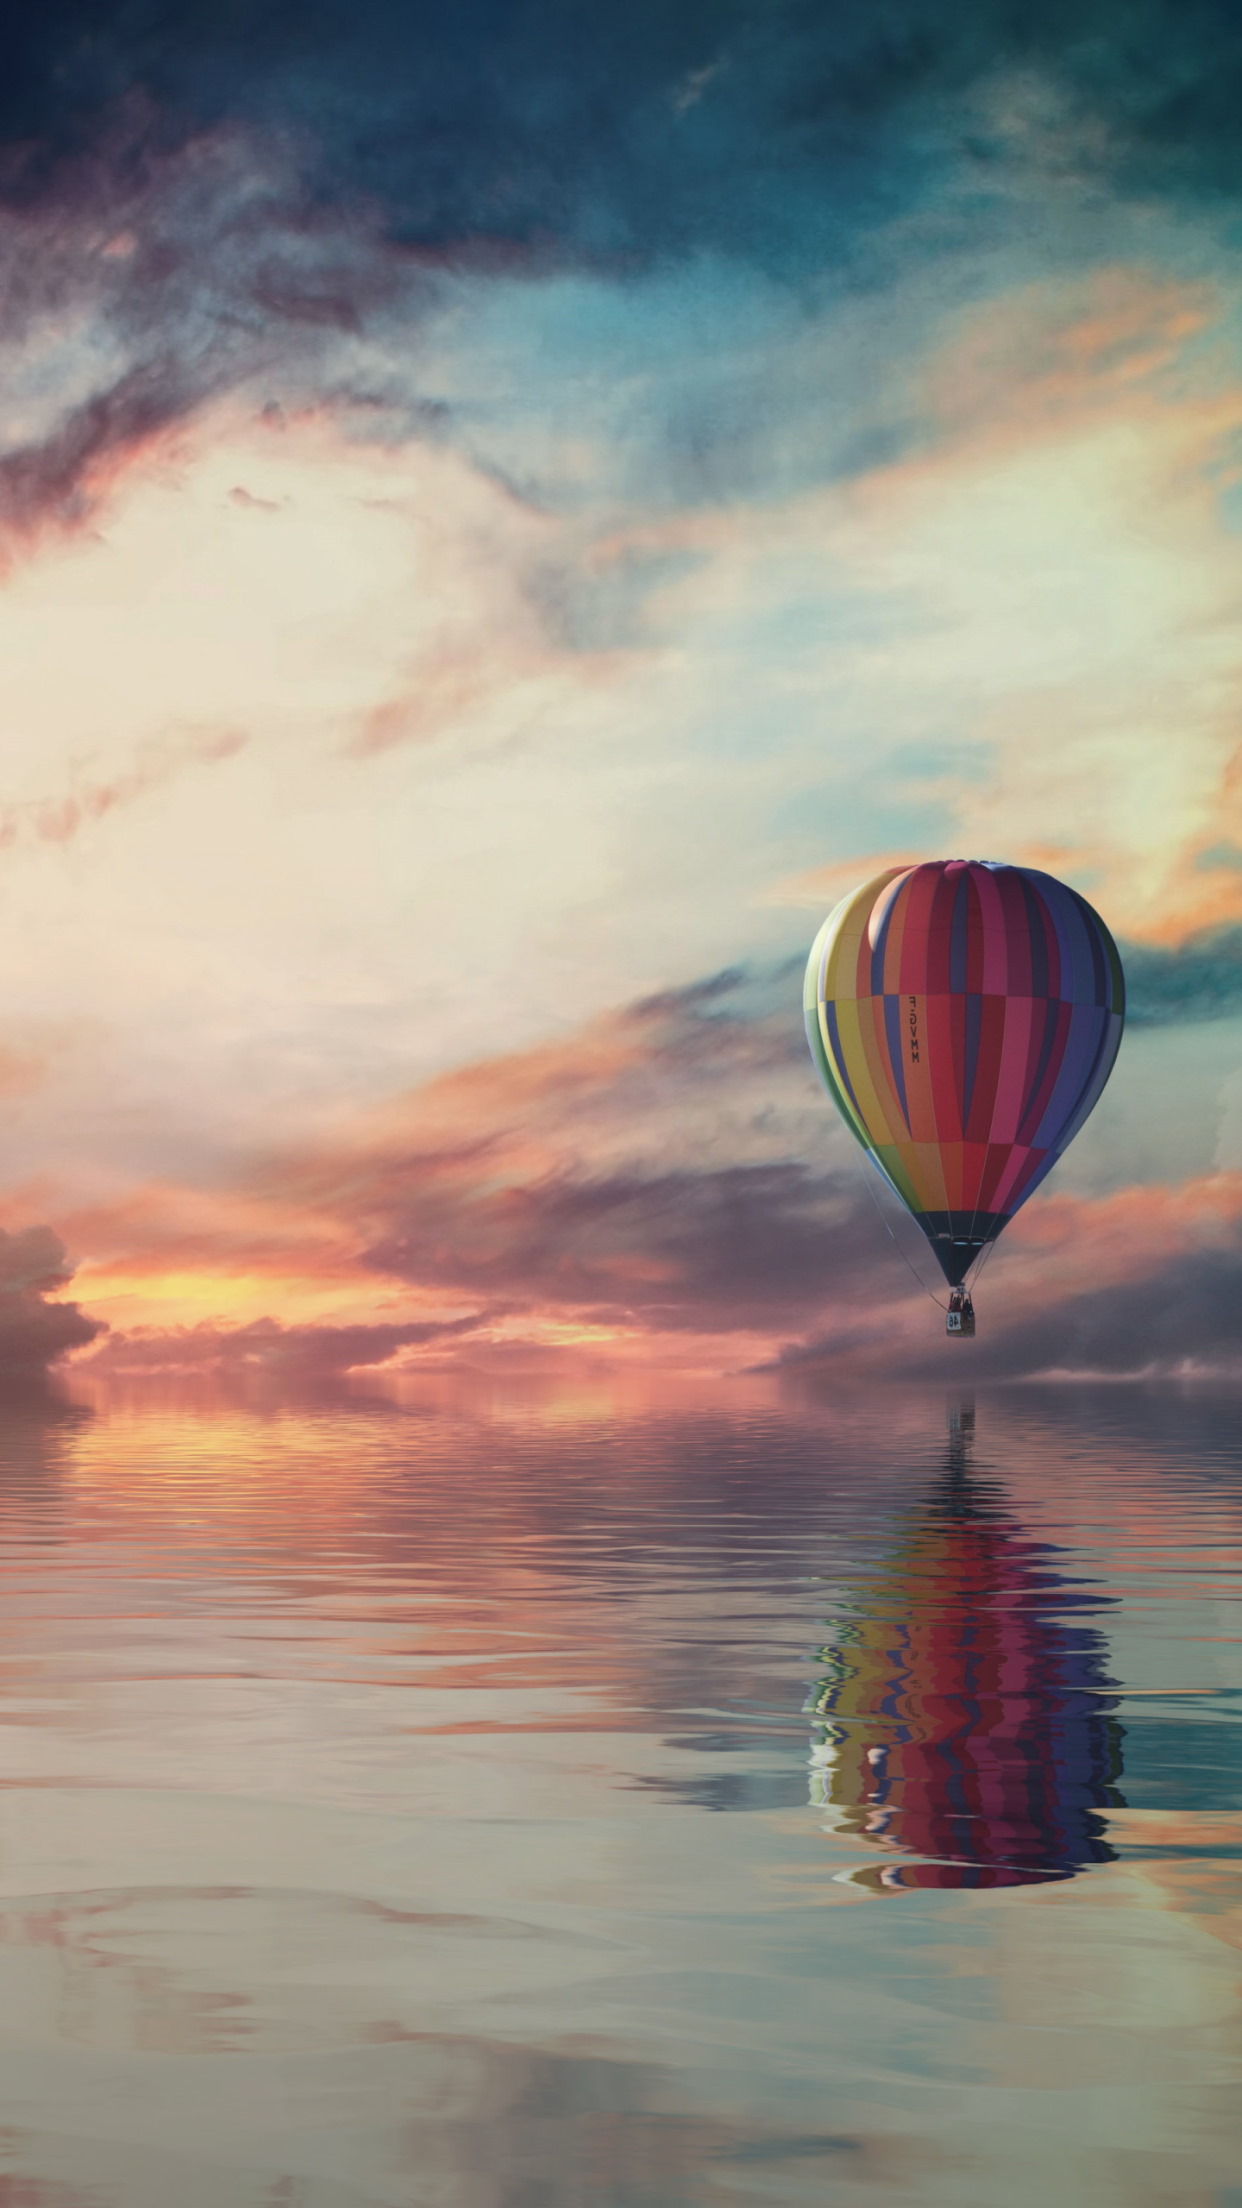 Fantasy travel with the hot air balloon wallpaper 1242x2208